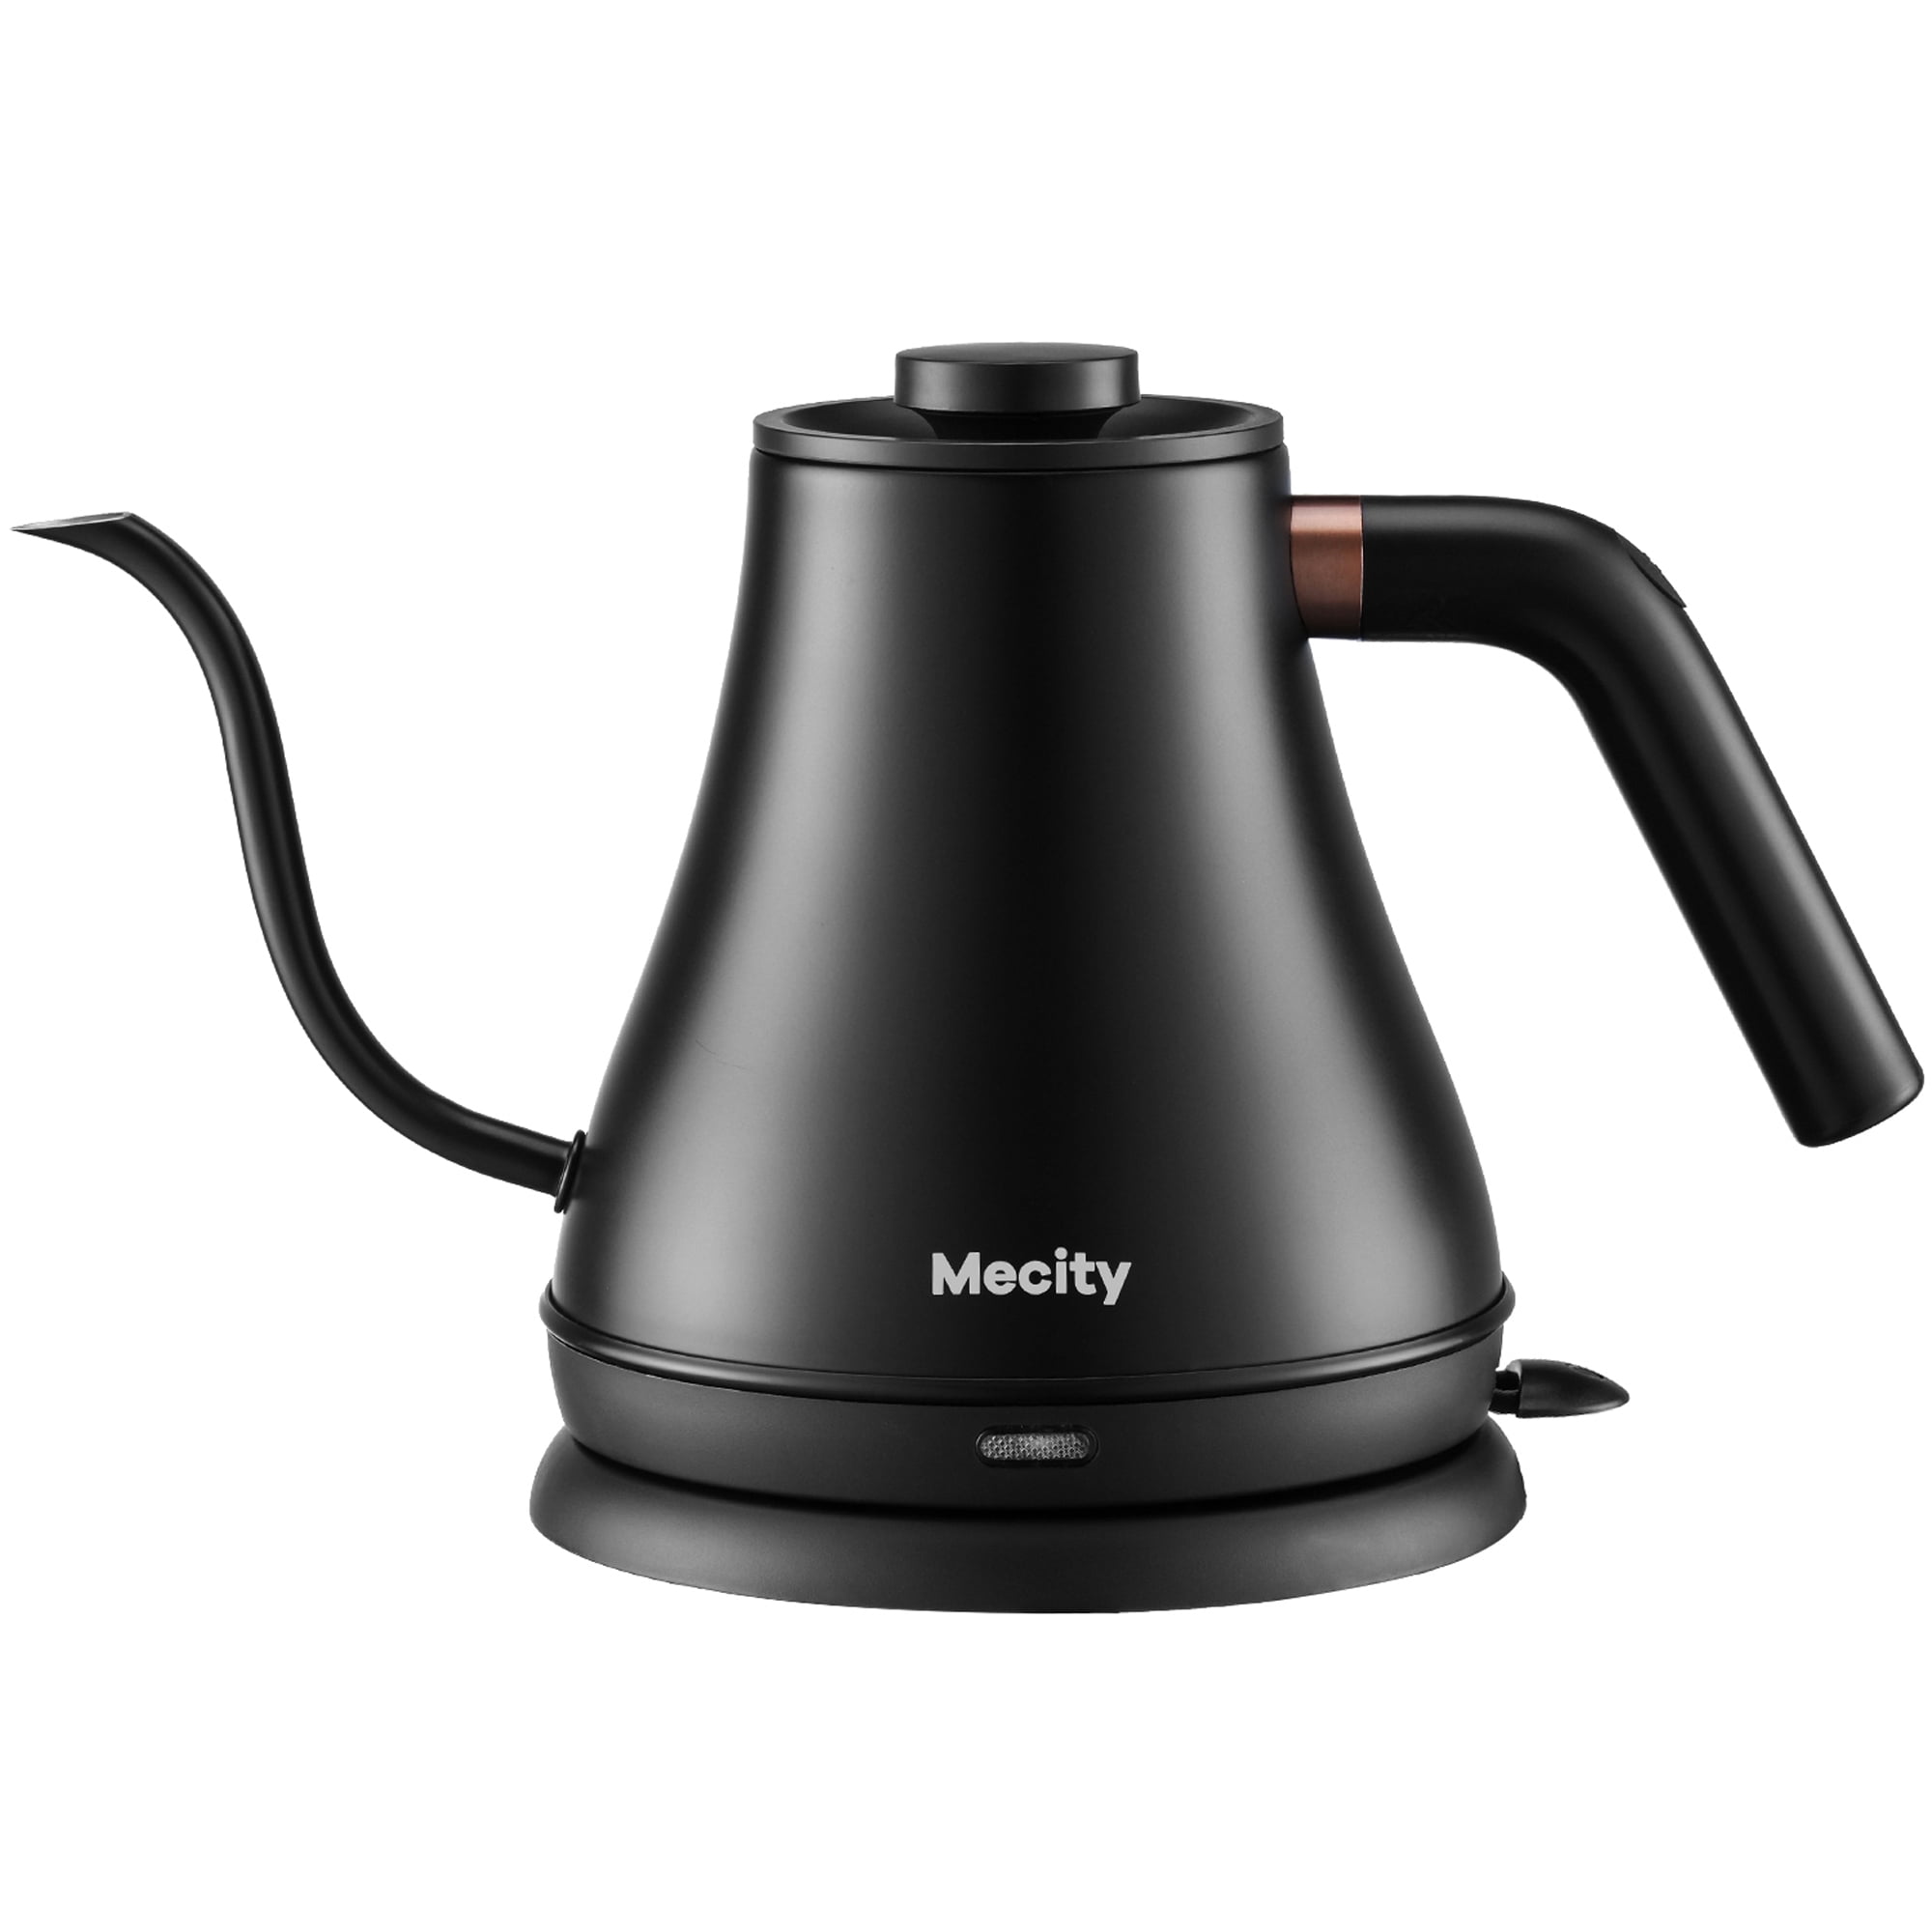 Mecity Electric Gooseneck Kettle with Display Automatic Shut Off Coffee Kettle Temperature Control Hot Water Boiler Pour Over Tea Kettle 1200 Watt